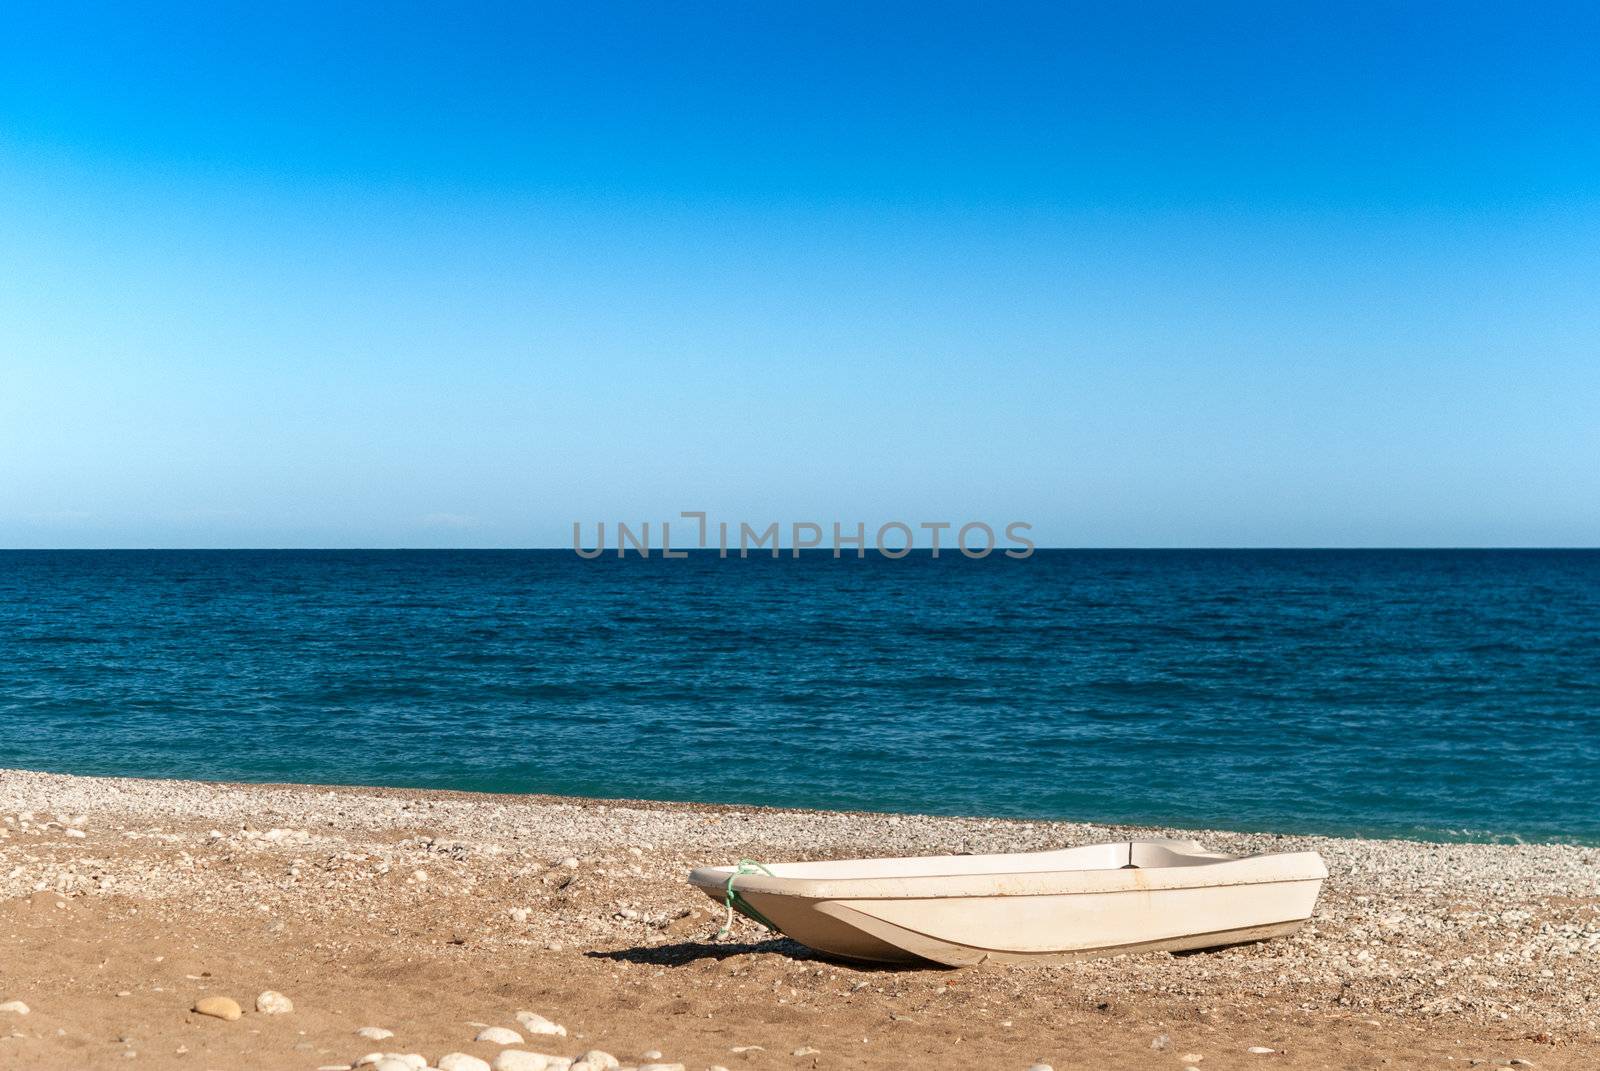 Boat on the beach by kirs-ua